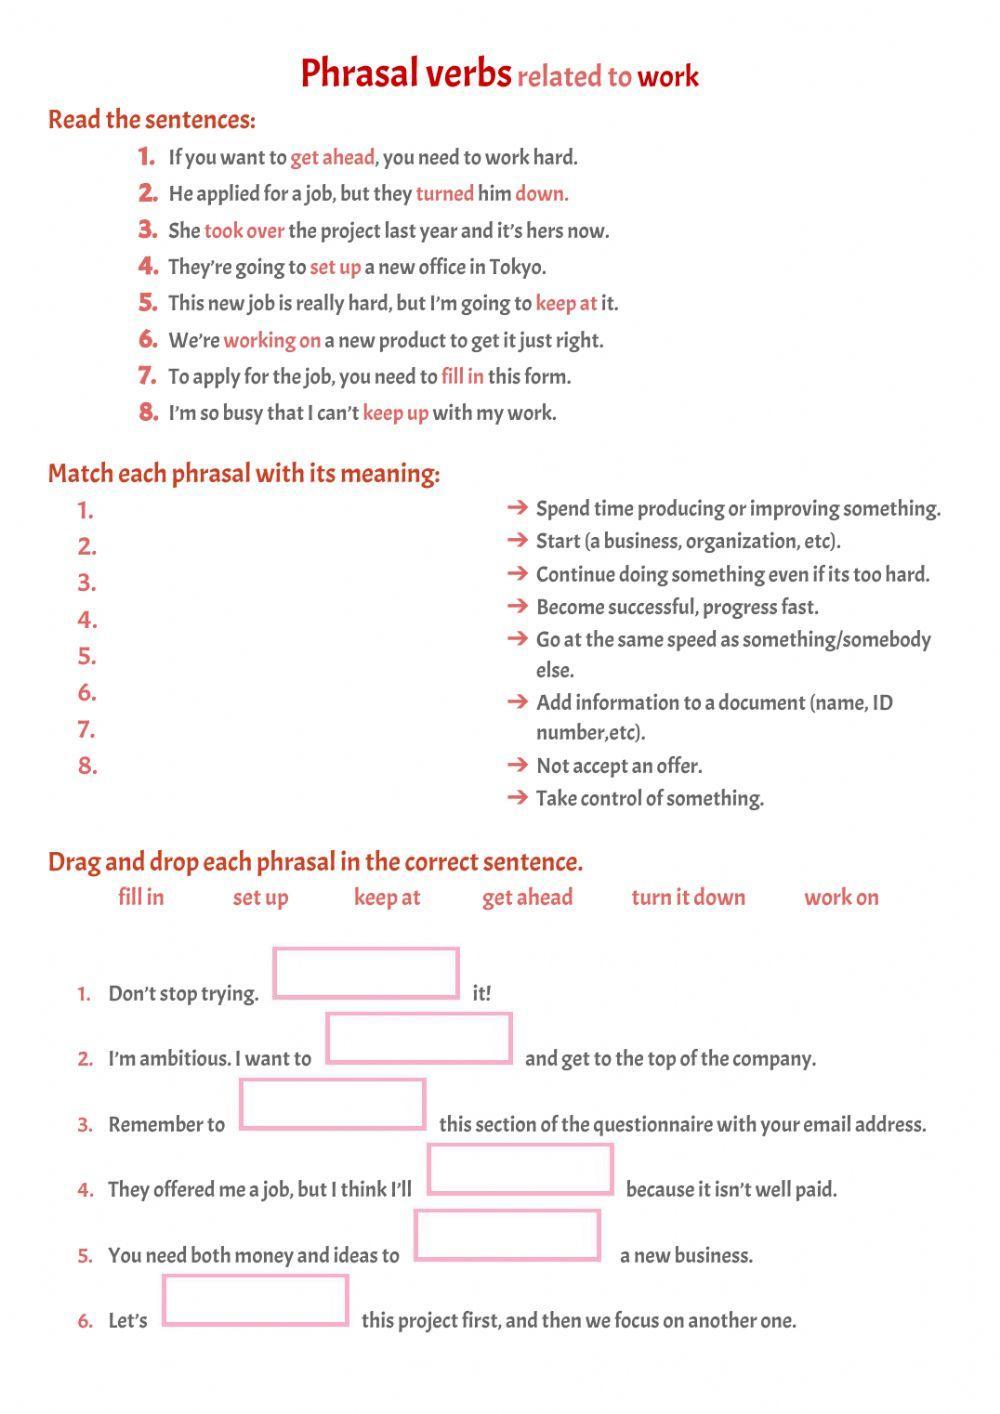 Phrasal verbs related to work